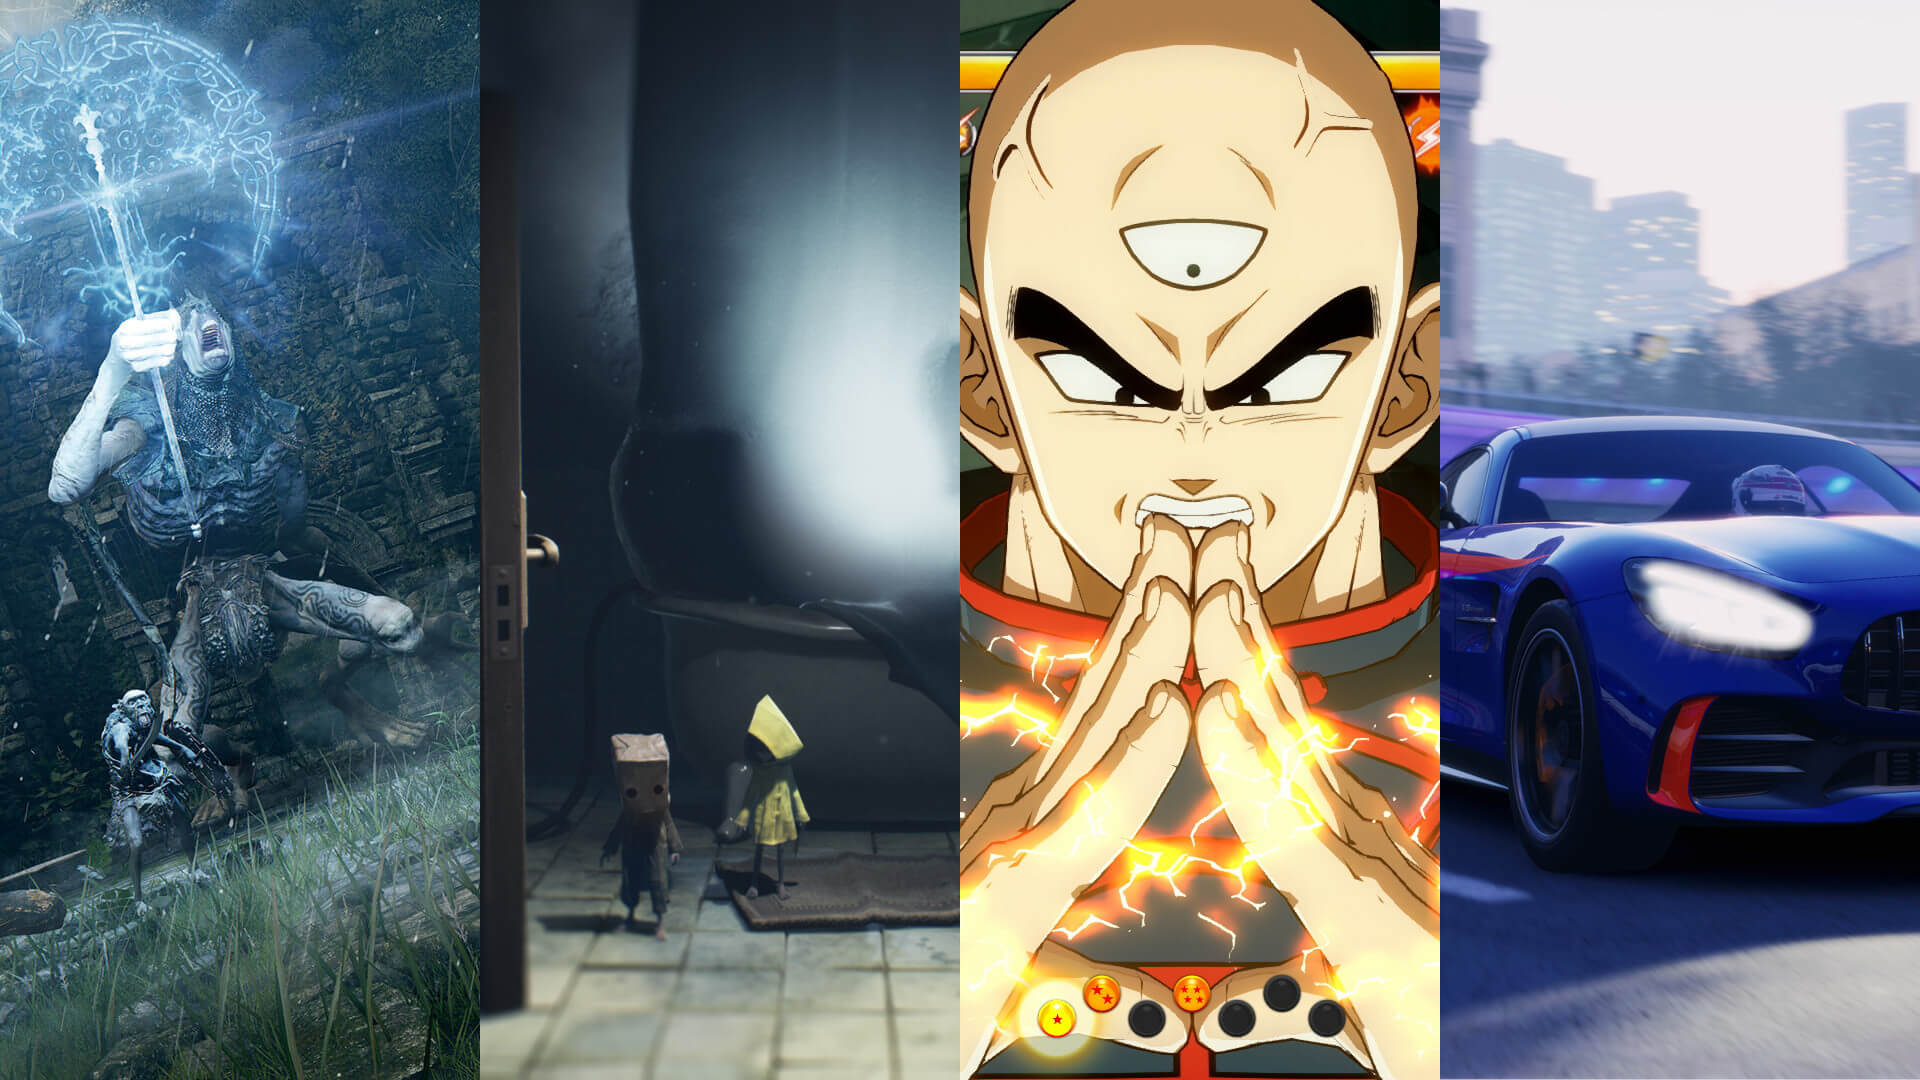 Elden Ring, Little Nightmares II, Dragon Ball FighterZ, and Project Cars 3, all Bandai Namco games